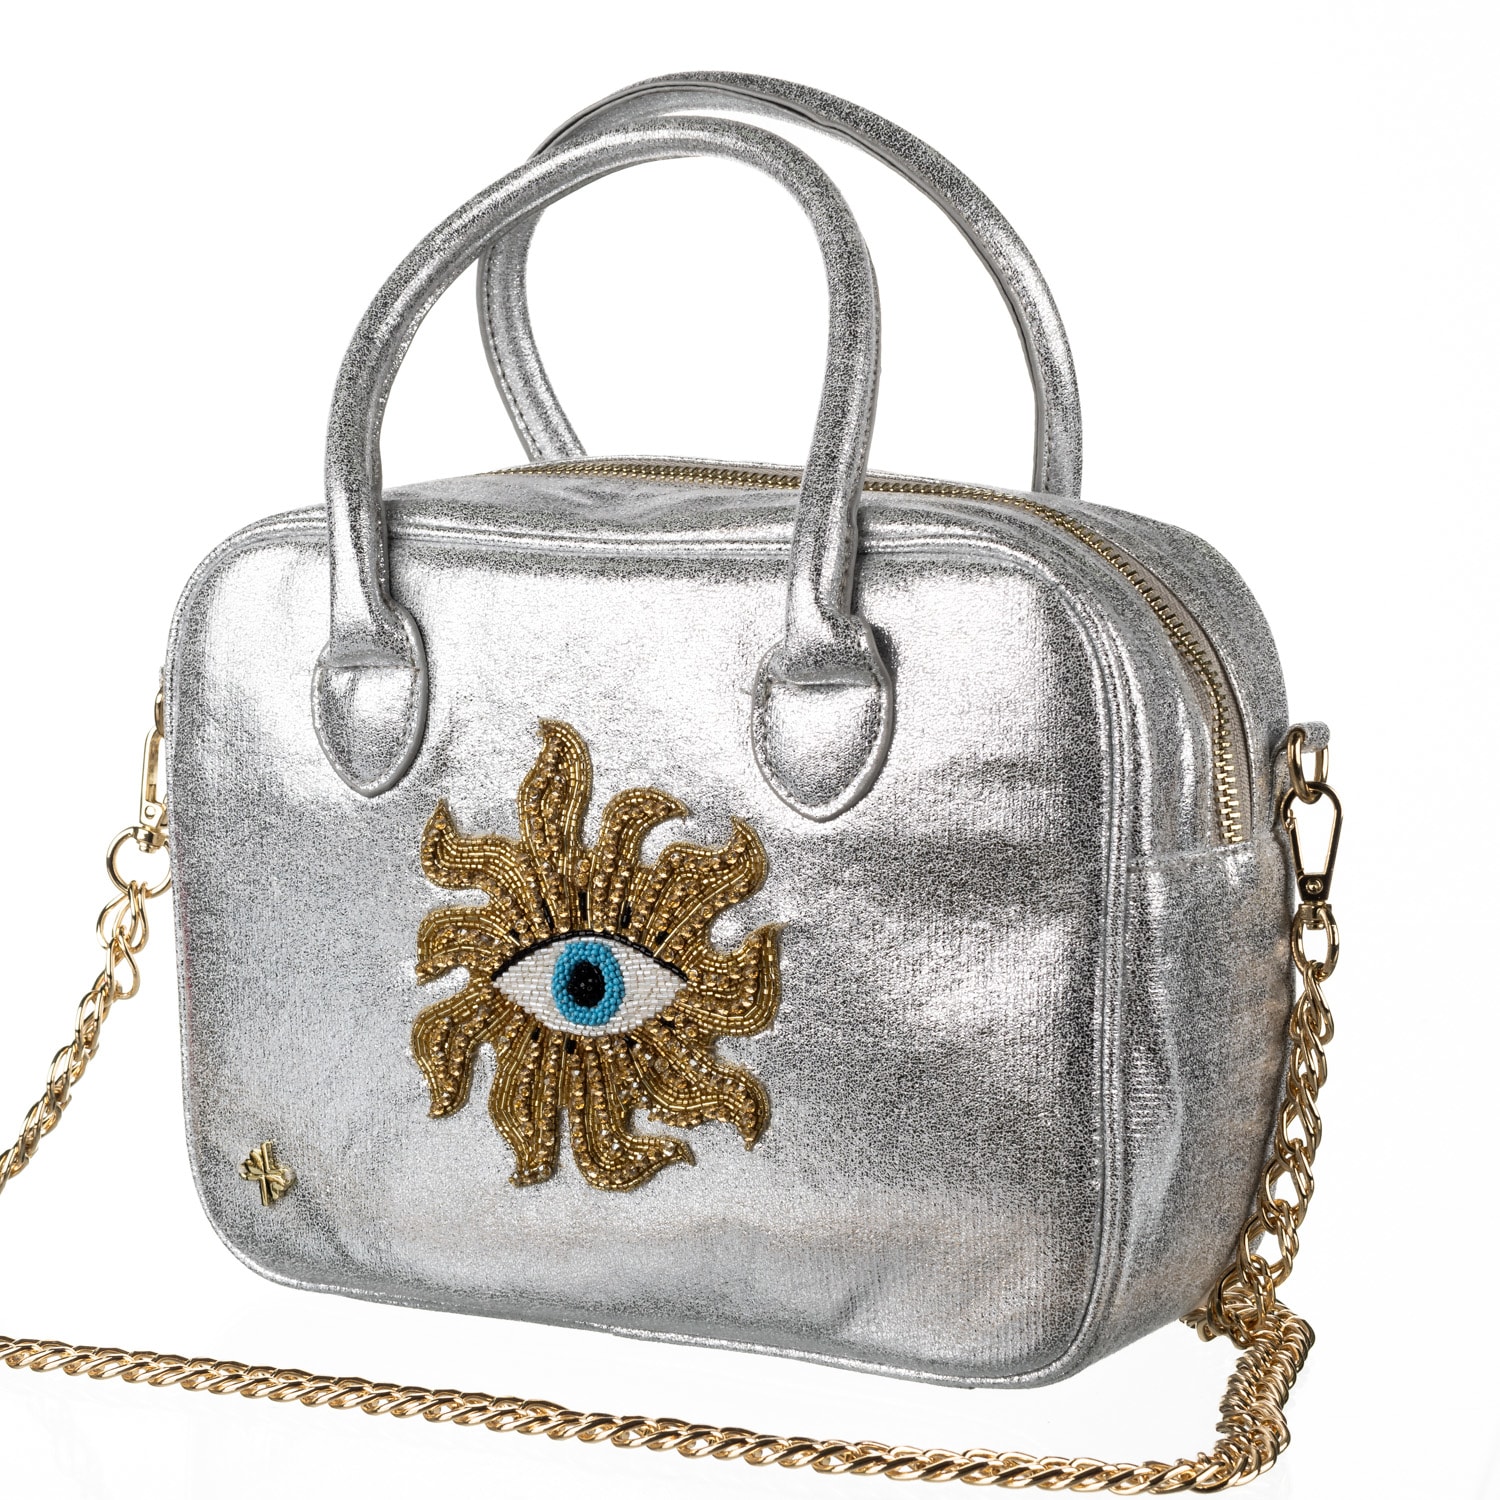 Women’s Laines London Couture Silver Metallic Bag With Embellished Mystic Eye